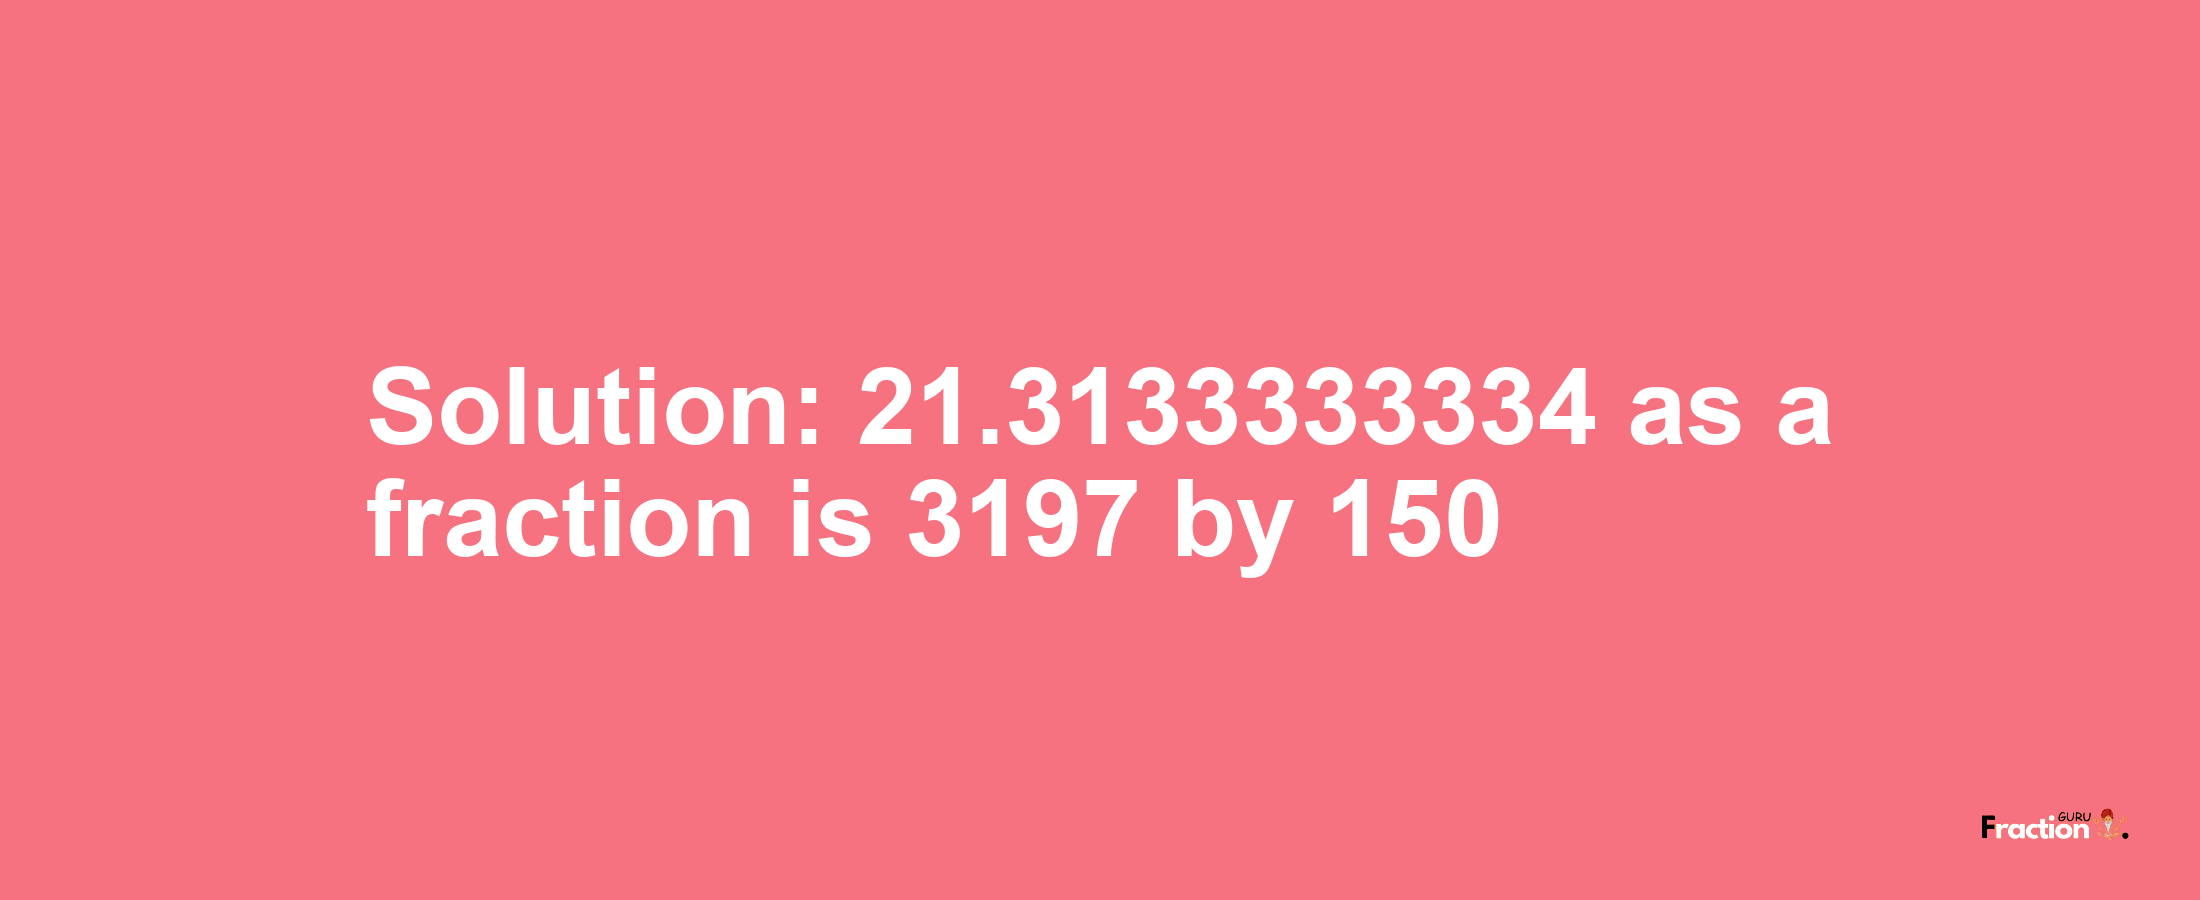 Solution:21.3133333334 as a fraction is 3197/150